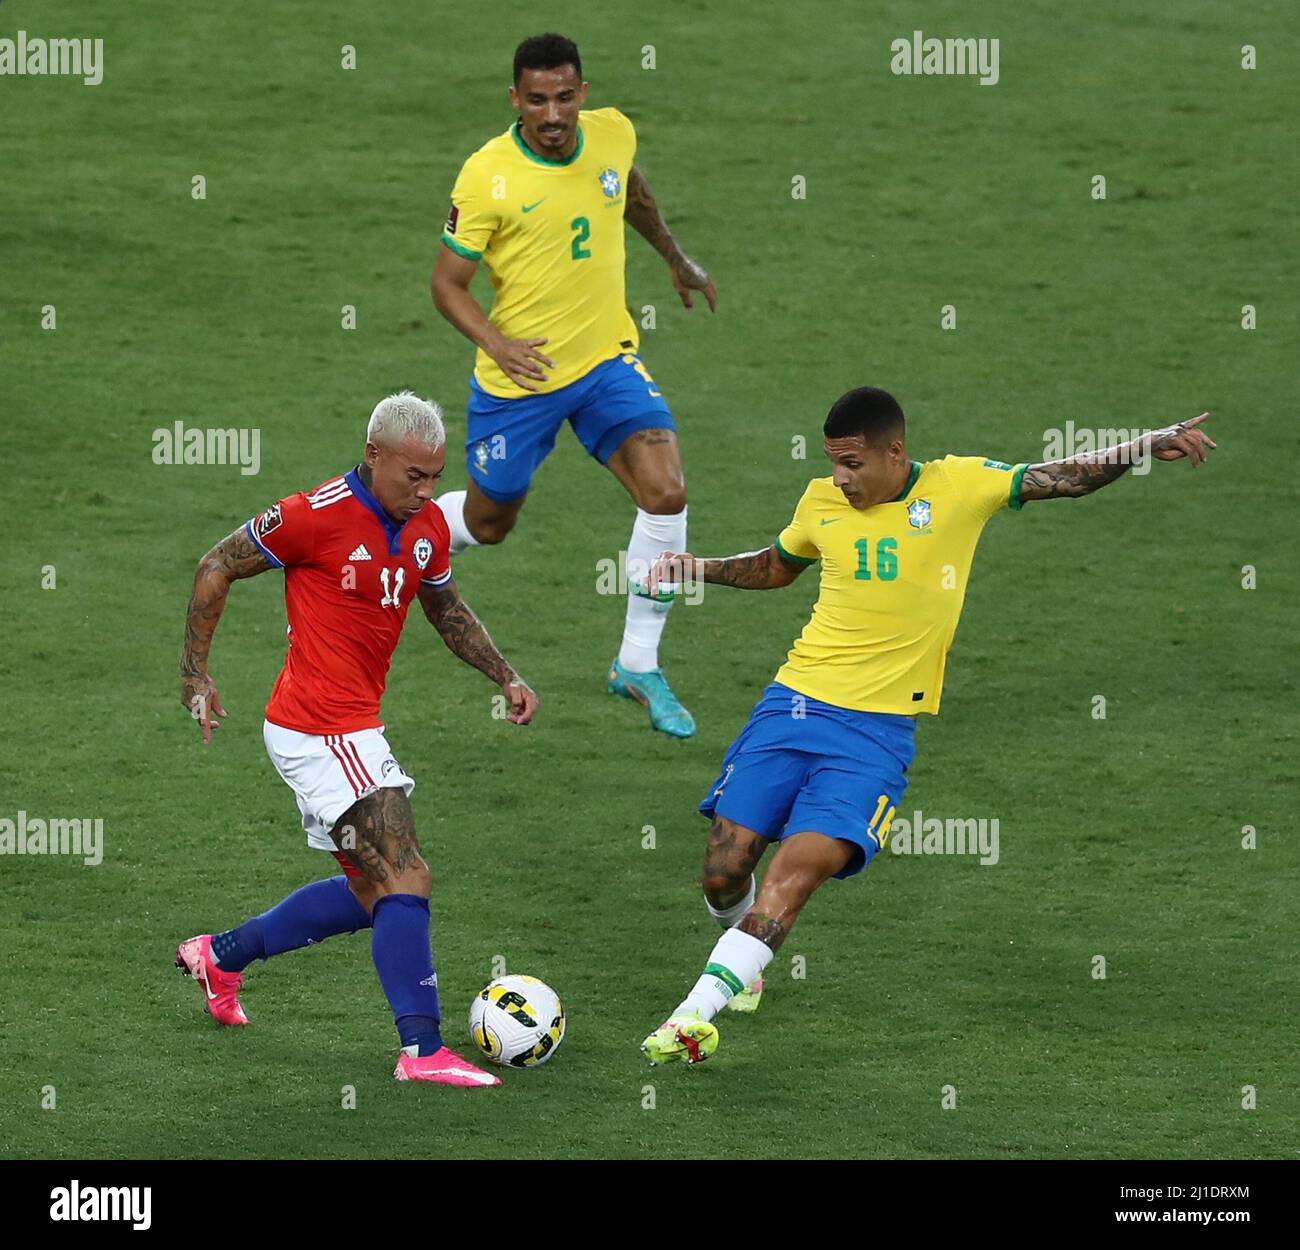 Rio De Janeiro. 24th Mar, 2022. Guilherme Arana (R) of Brazil vies with Eduardo Vargas (L) of Chile during the 2022 FIFA World Cup Qualifier between Brazil and Chile in Rio de Janeiro, Brazil on March 24, 2022. Credit: Wang Tiancong/Xinhua/Alamy Live News Stock Photo